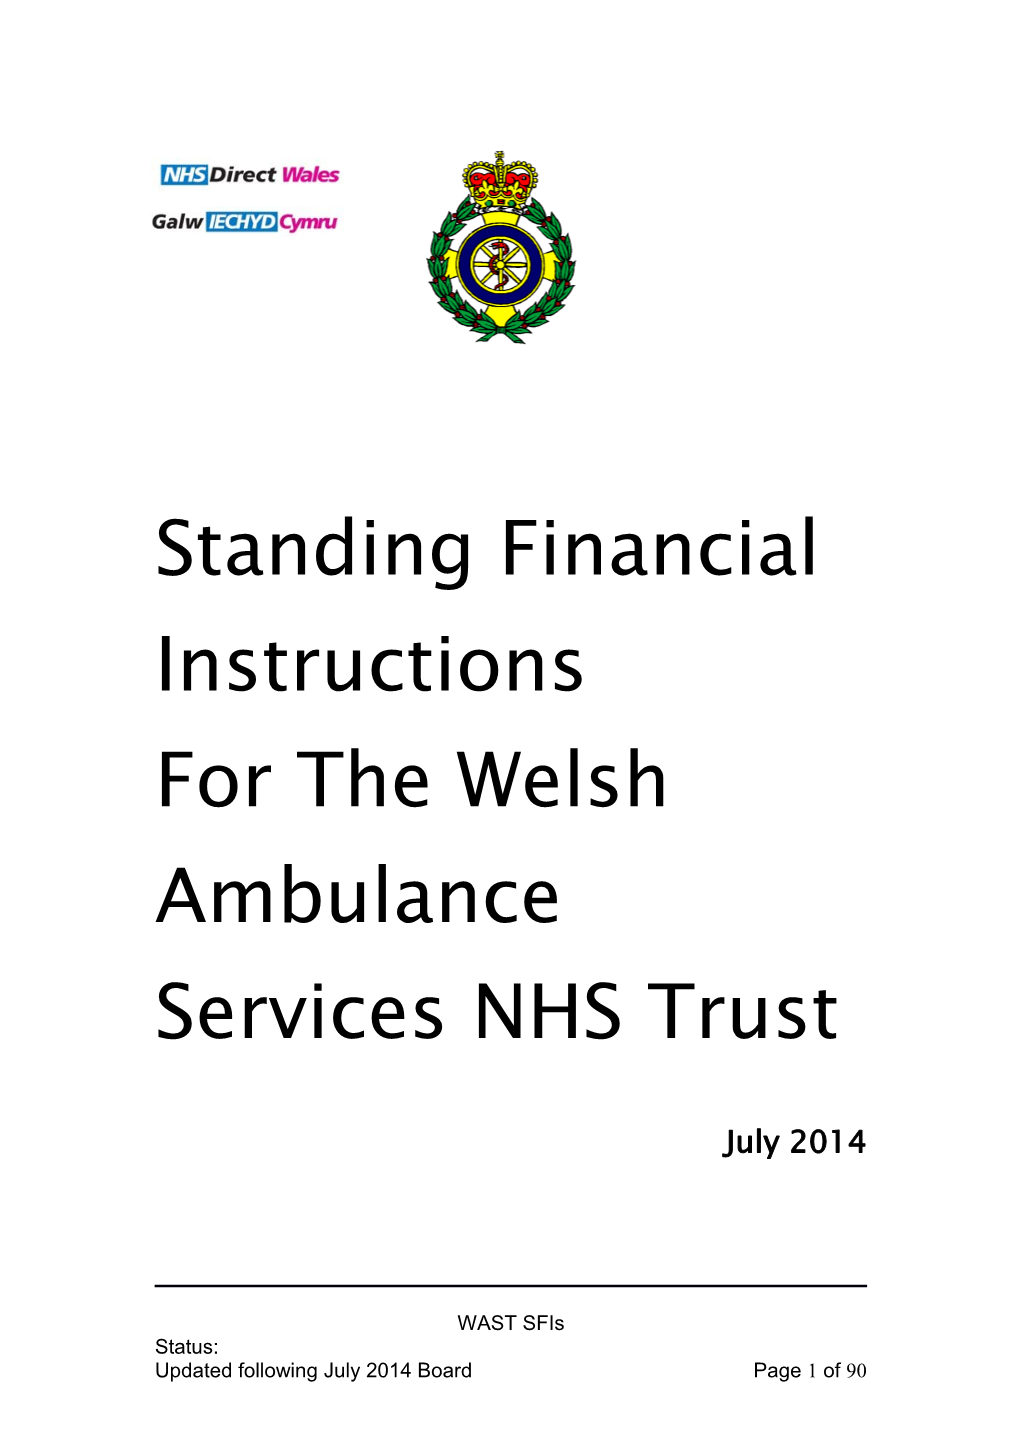 For the Welsh Ambulance Services NHS Trust